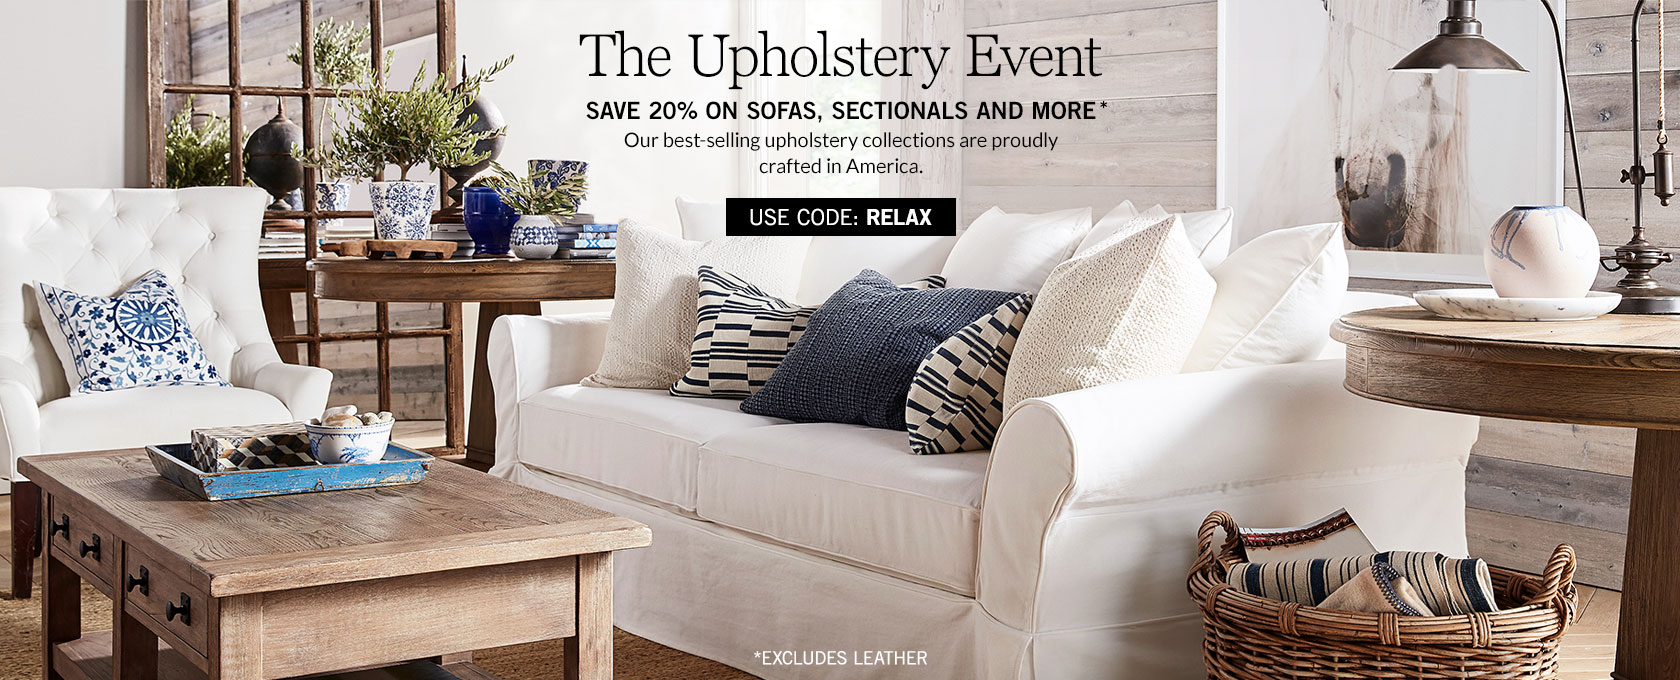 The Upholstery Event